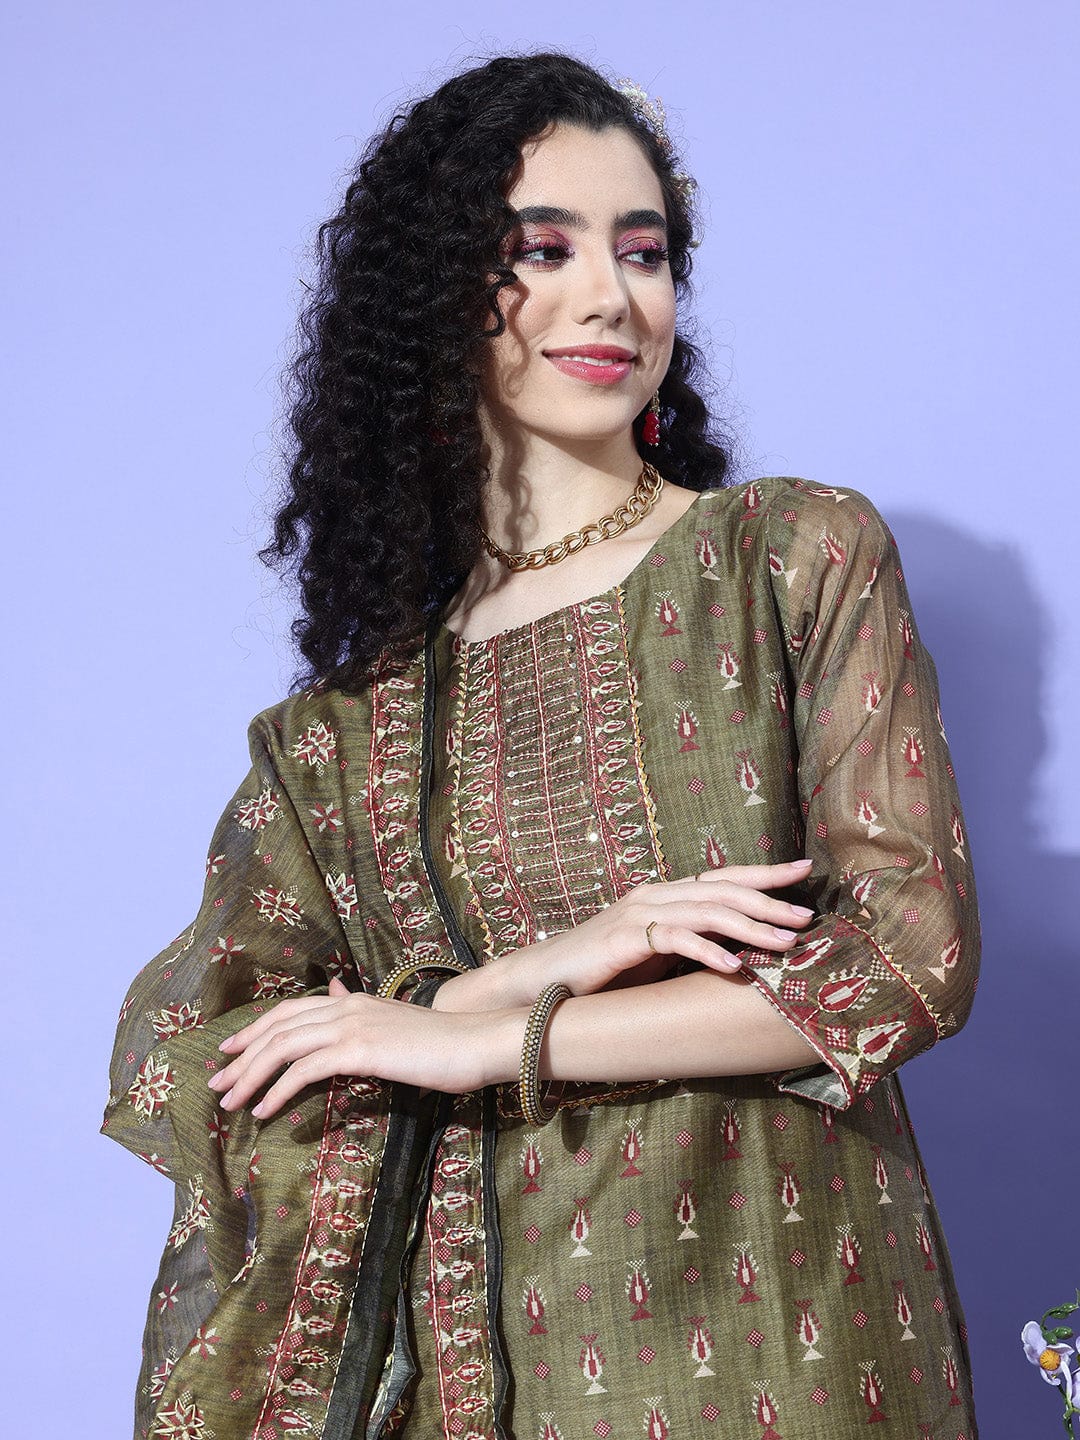 Olive Ethnic Motif Printed Kurta Paired With Bottom And Dupatta